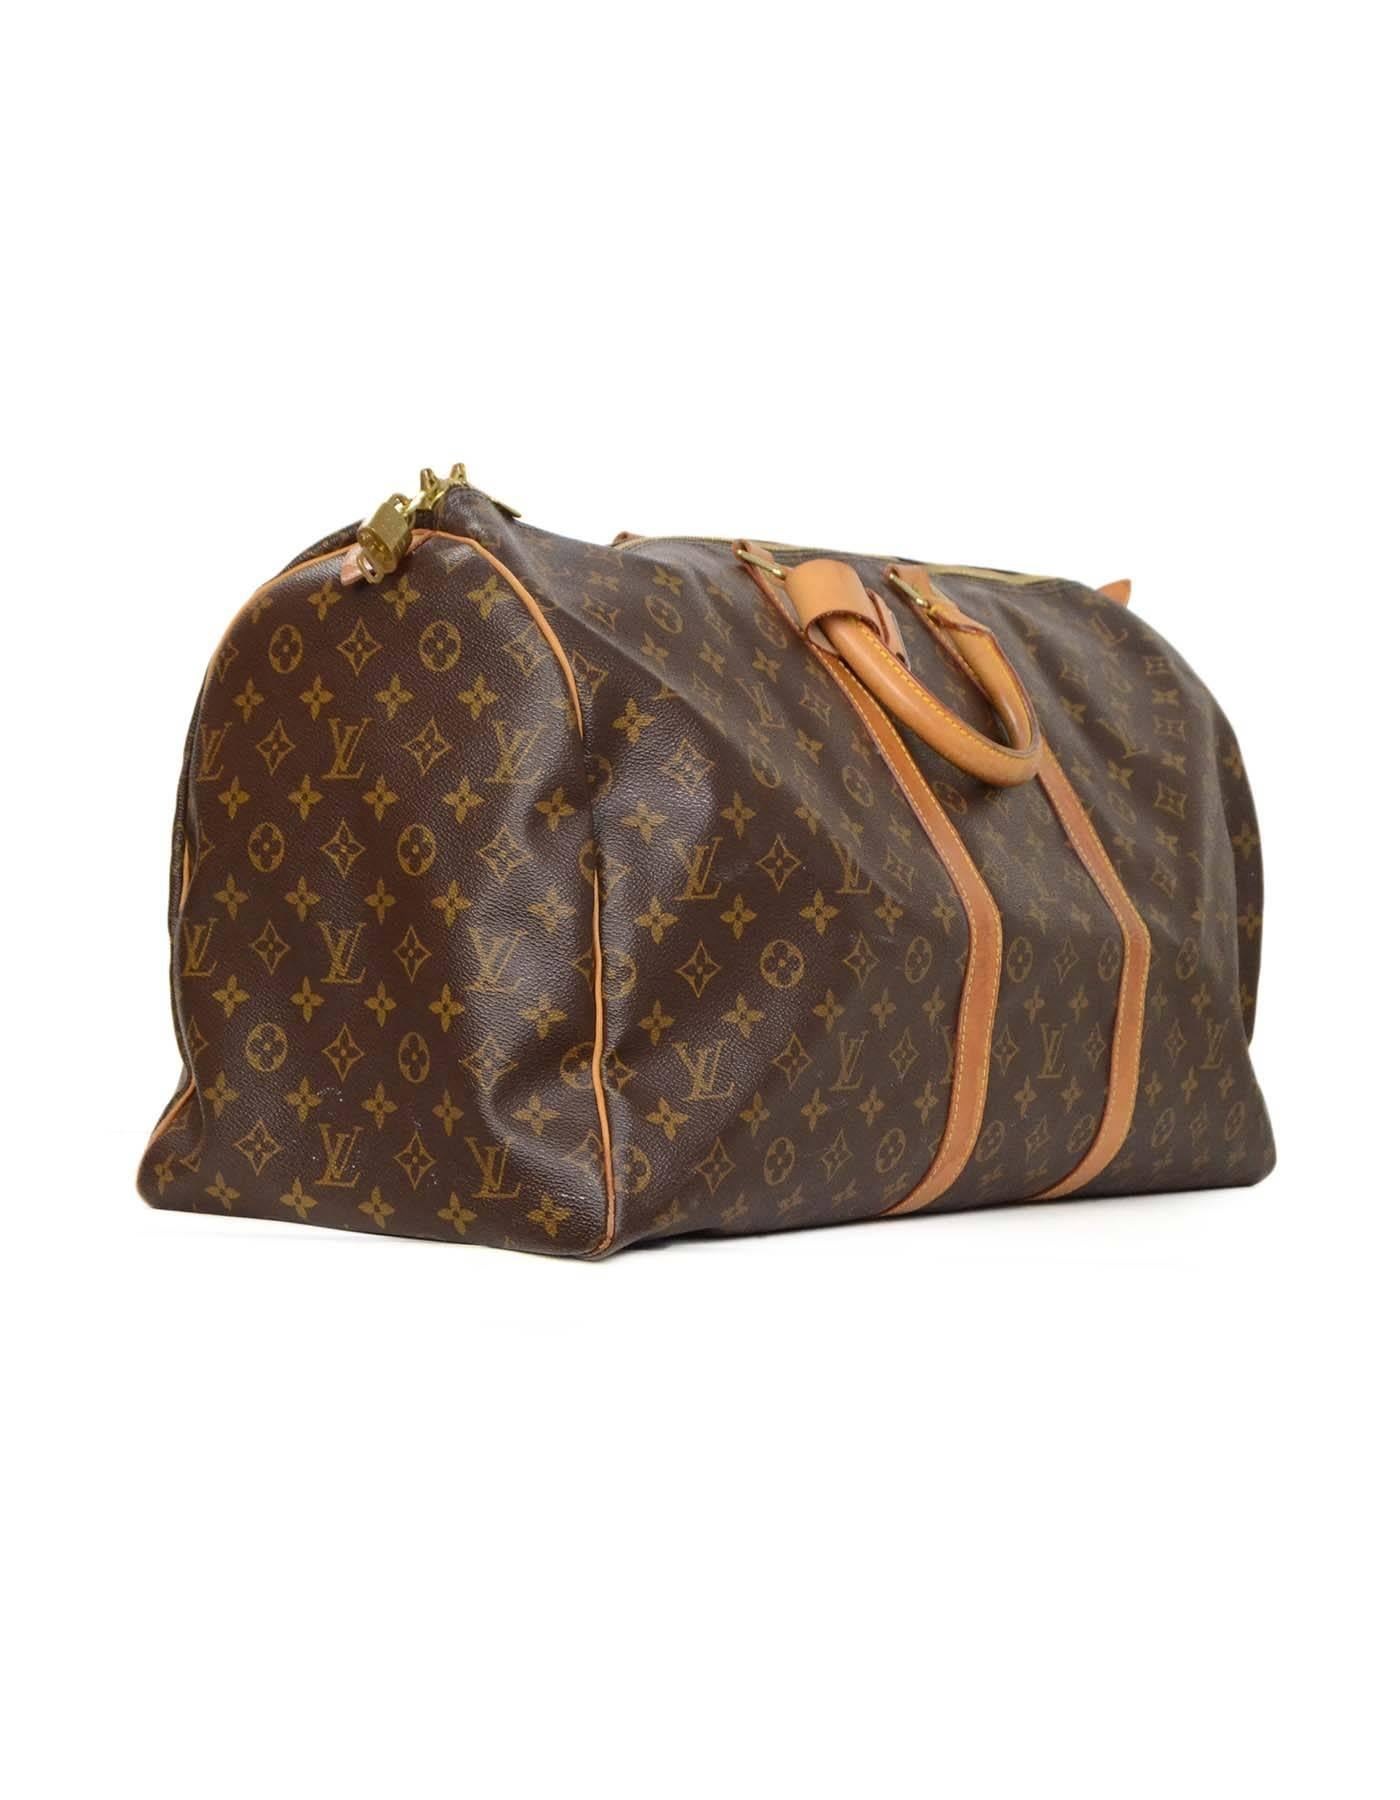 Louis Vuitton Monogram Keepall 55 Luggage 
Features leather wrapped handles and leather trim
Made In: France
Year of Production: 2001
Color: Brown and tan
Hardware: Goldtone
Materials: Coated canvas
Lining: Brown canvas
Closure/Opening: Zip